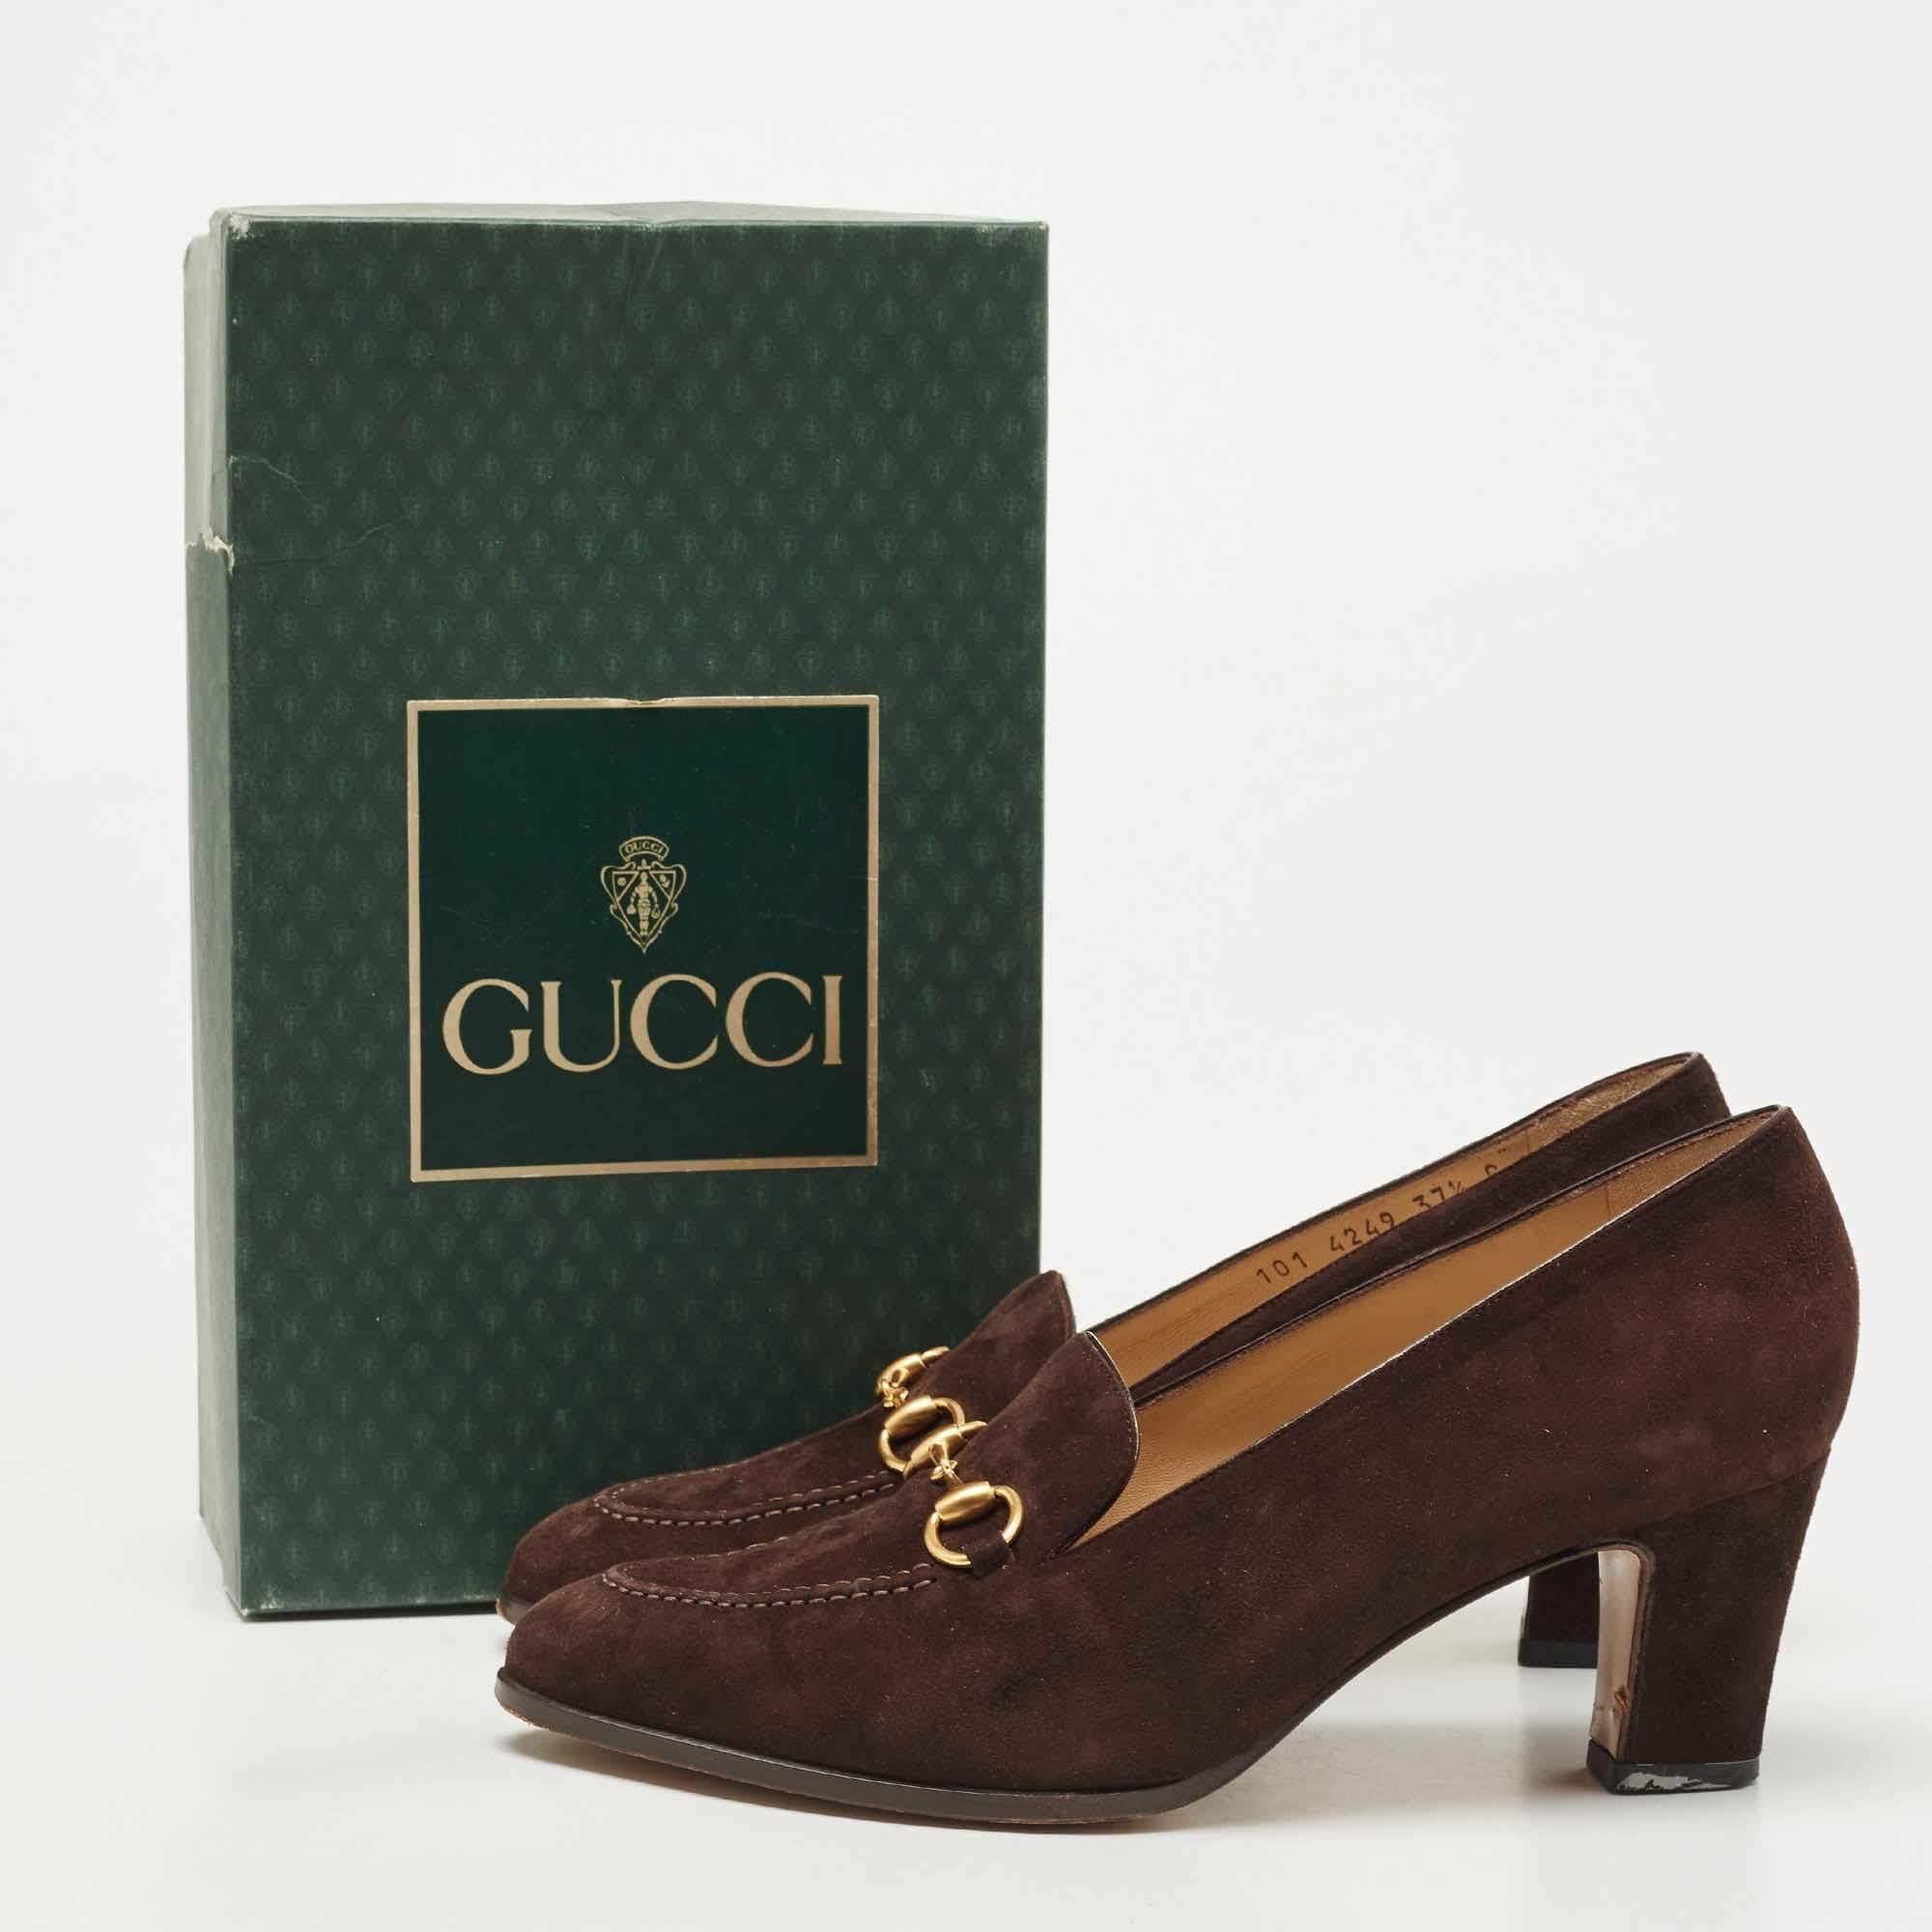 Gucci Brown Suede Loafer Pumps Size 37.5 4